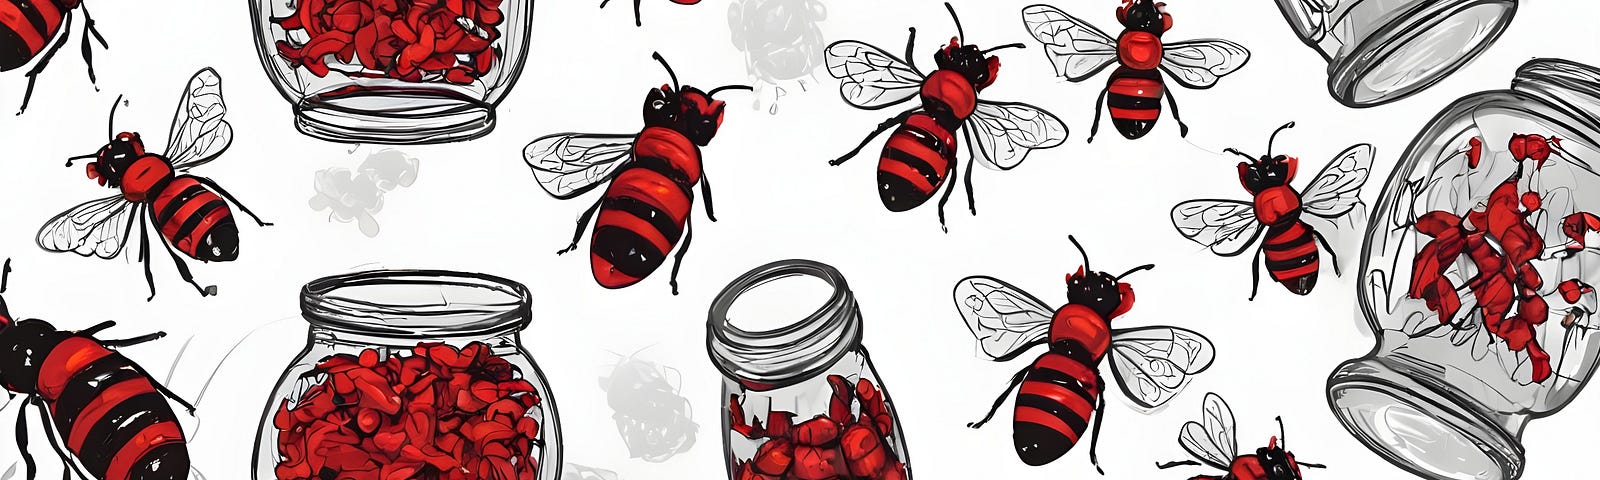 Red bees, bees in jars, drawing